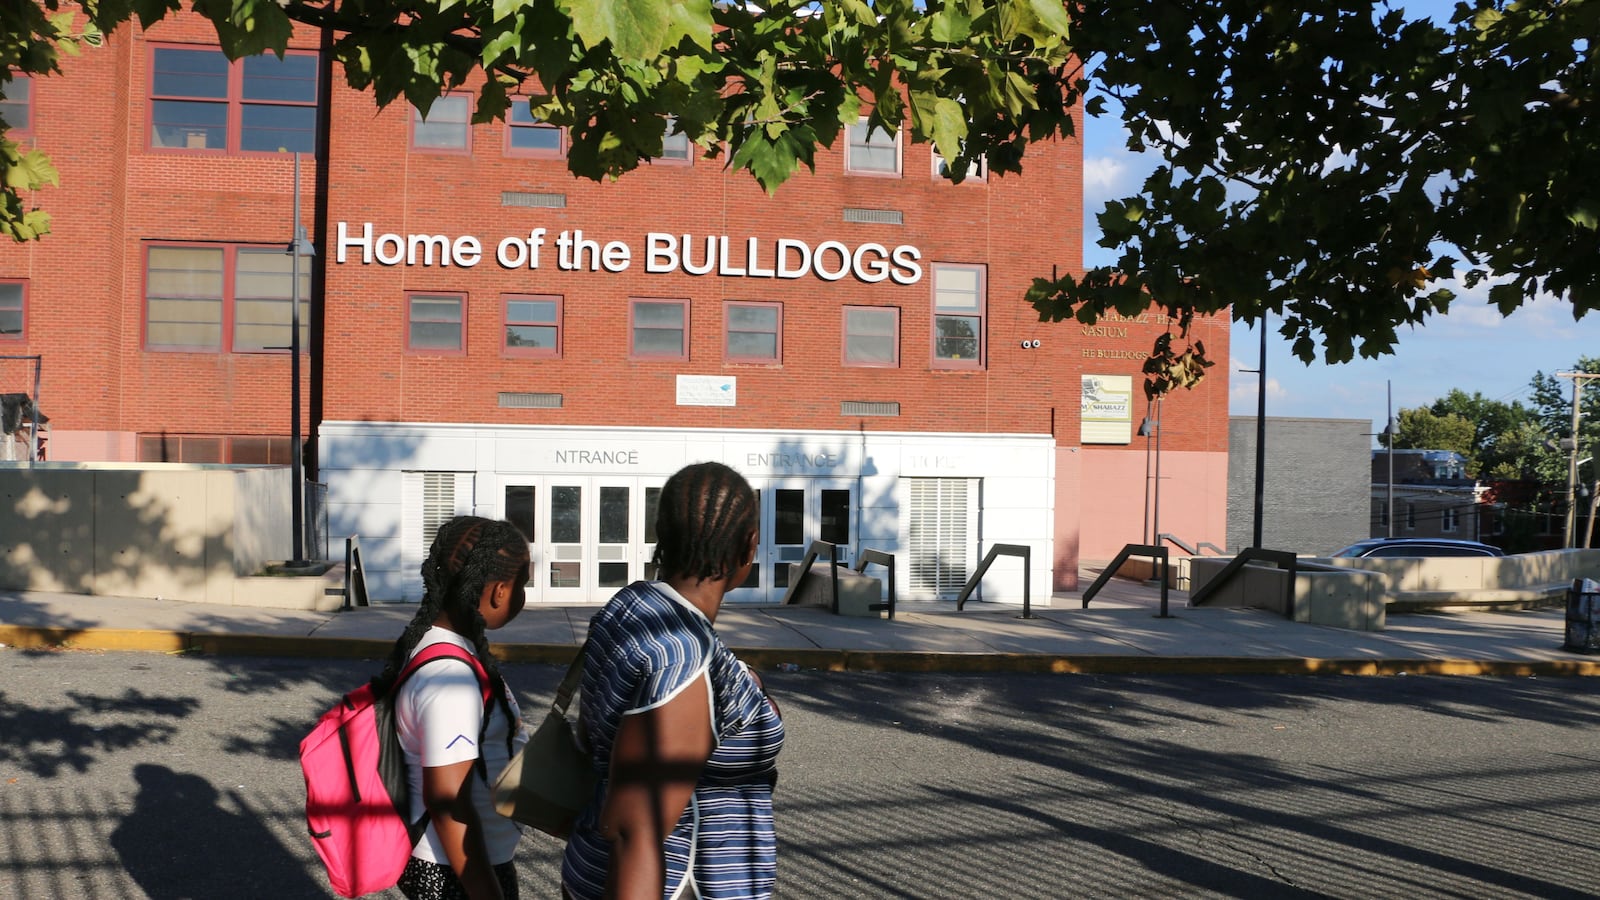 In the foreground, a student wearing a pink backpack stands behind an adult in a blue-striped shirt as they face Malcolm X Shabazz High School in the background.